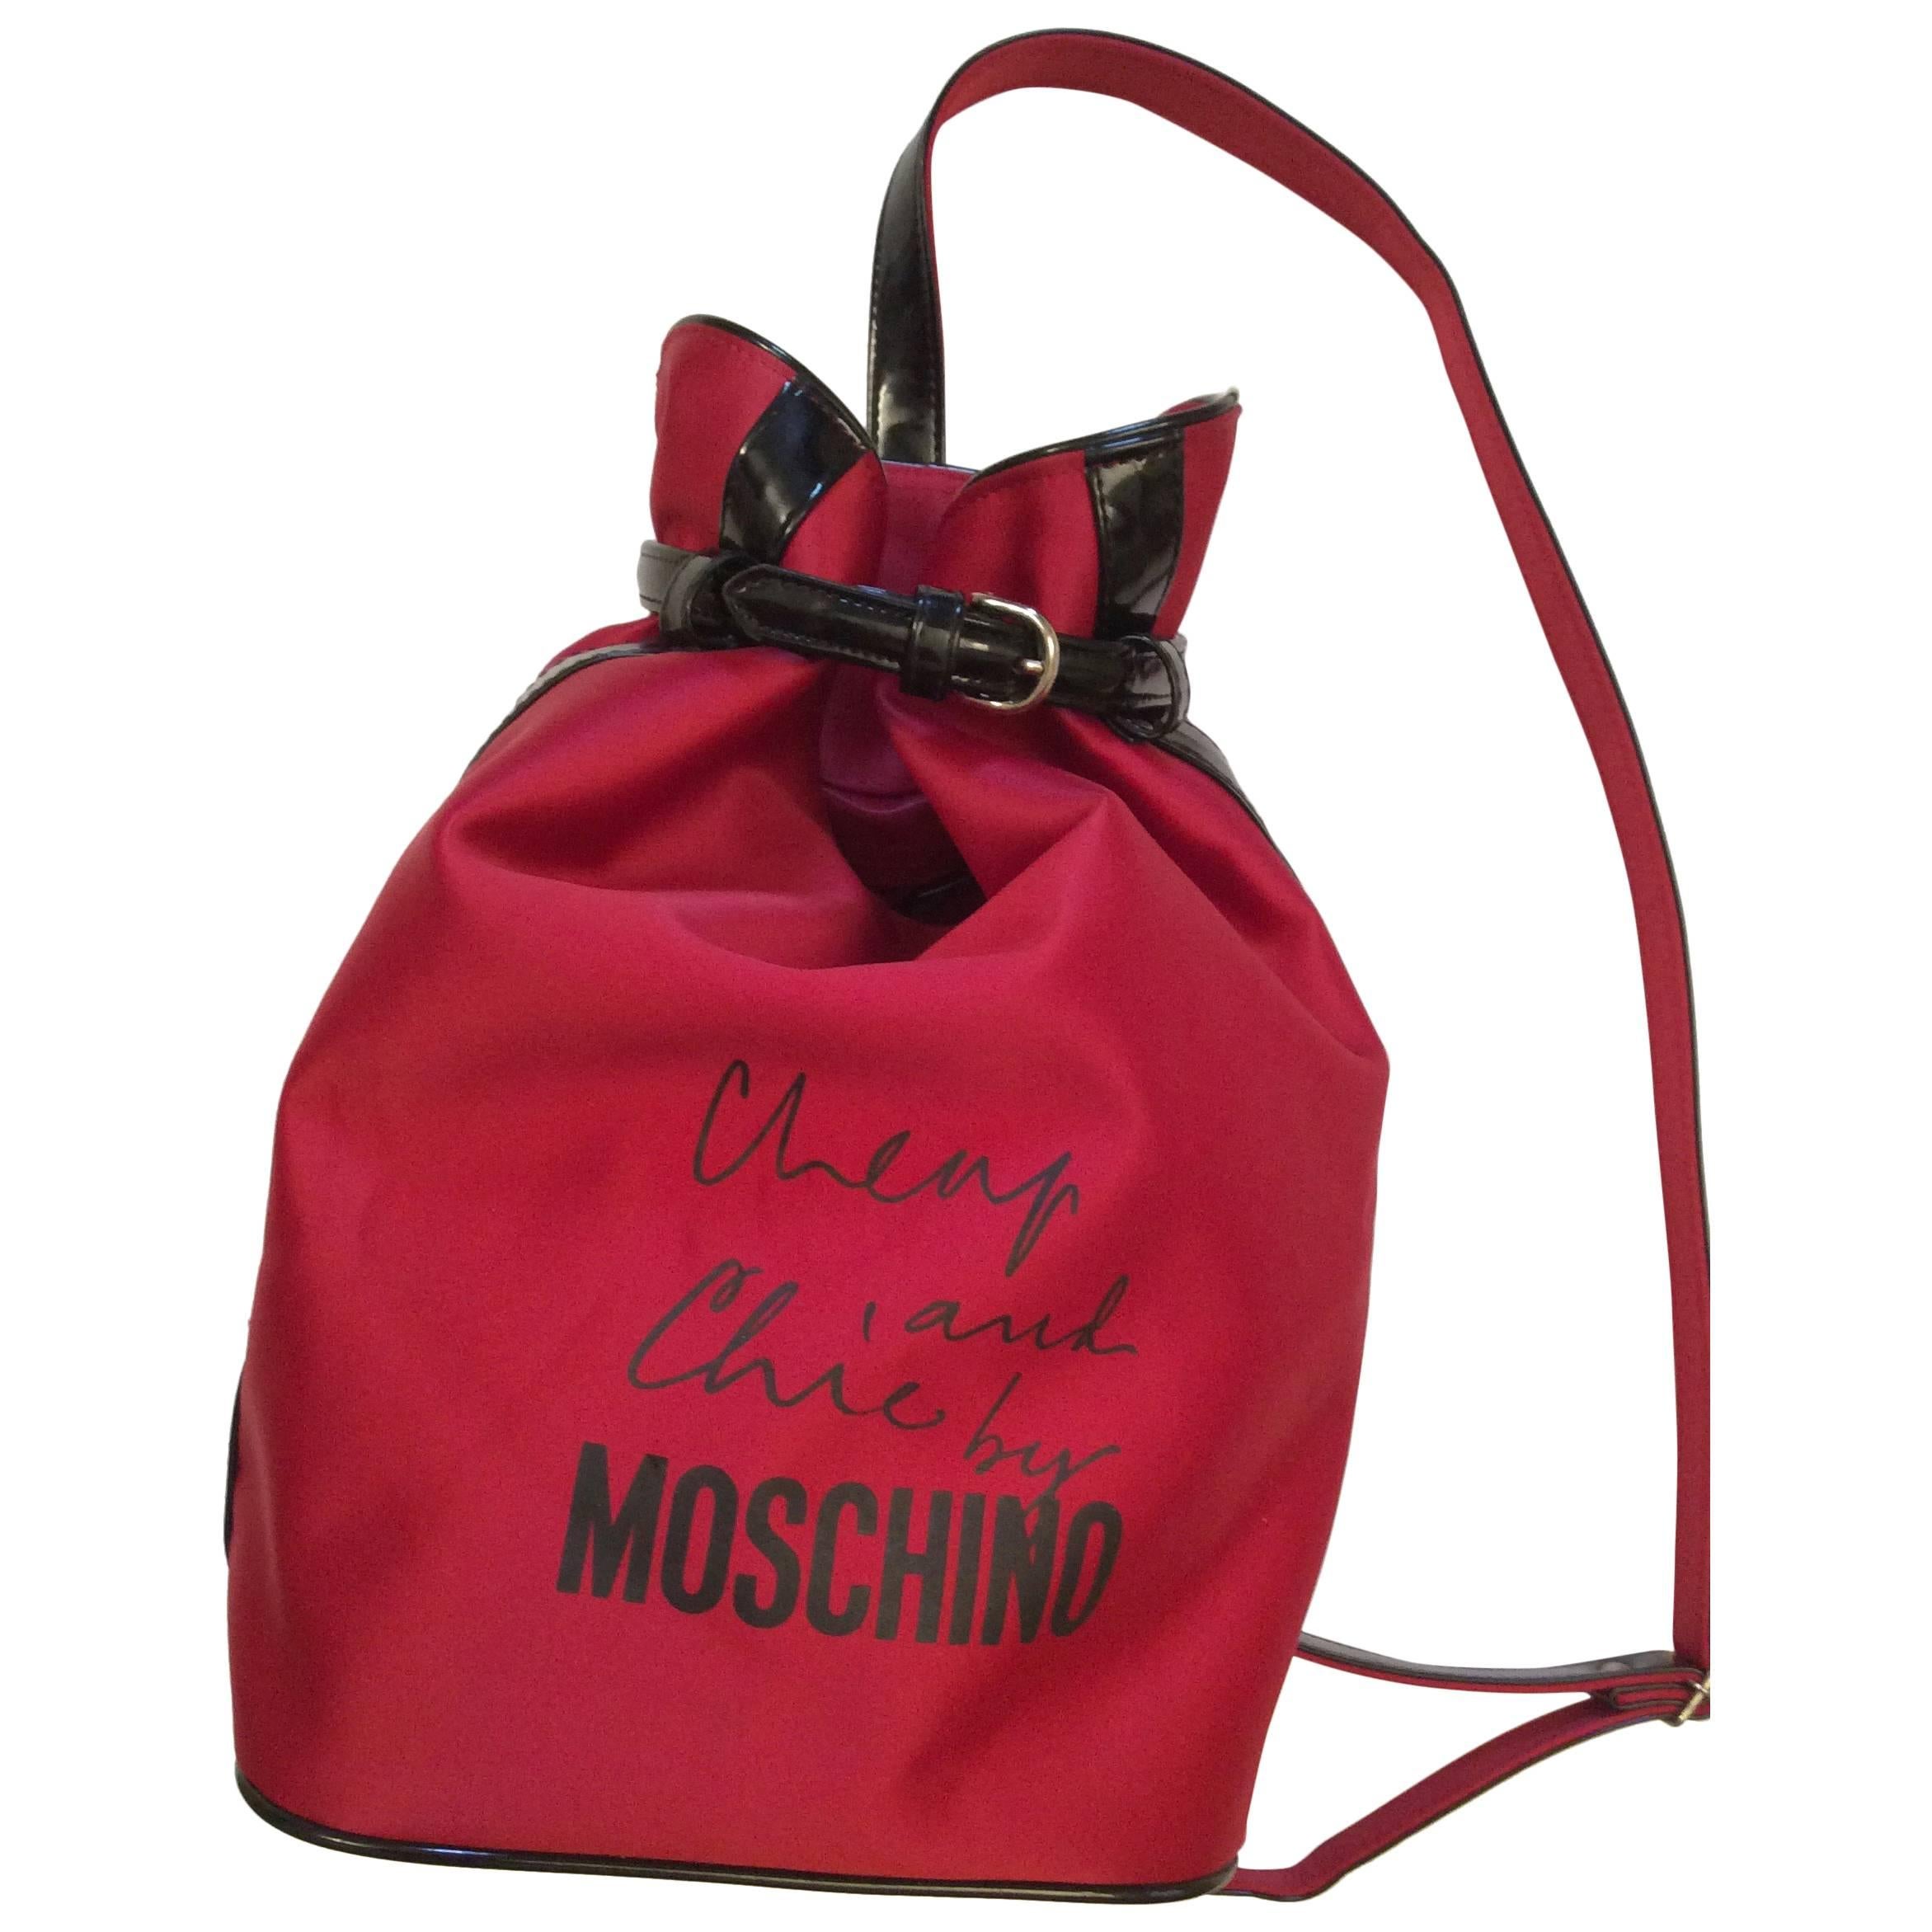 New Moschino Cheap and Chic Backpack / Purse For Sale